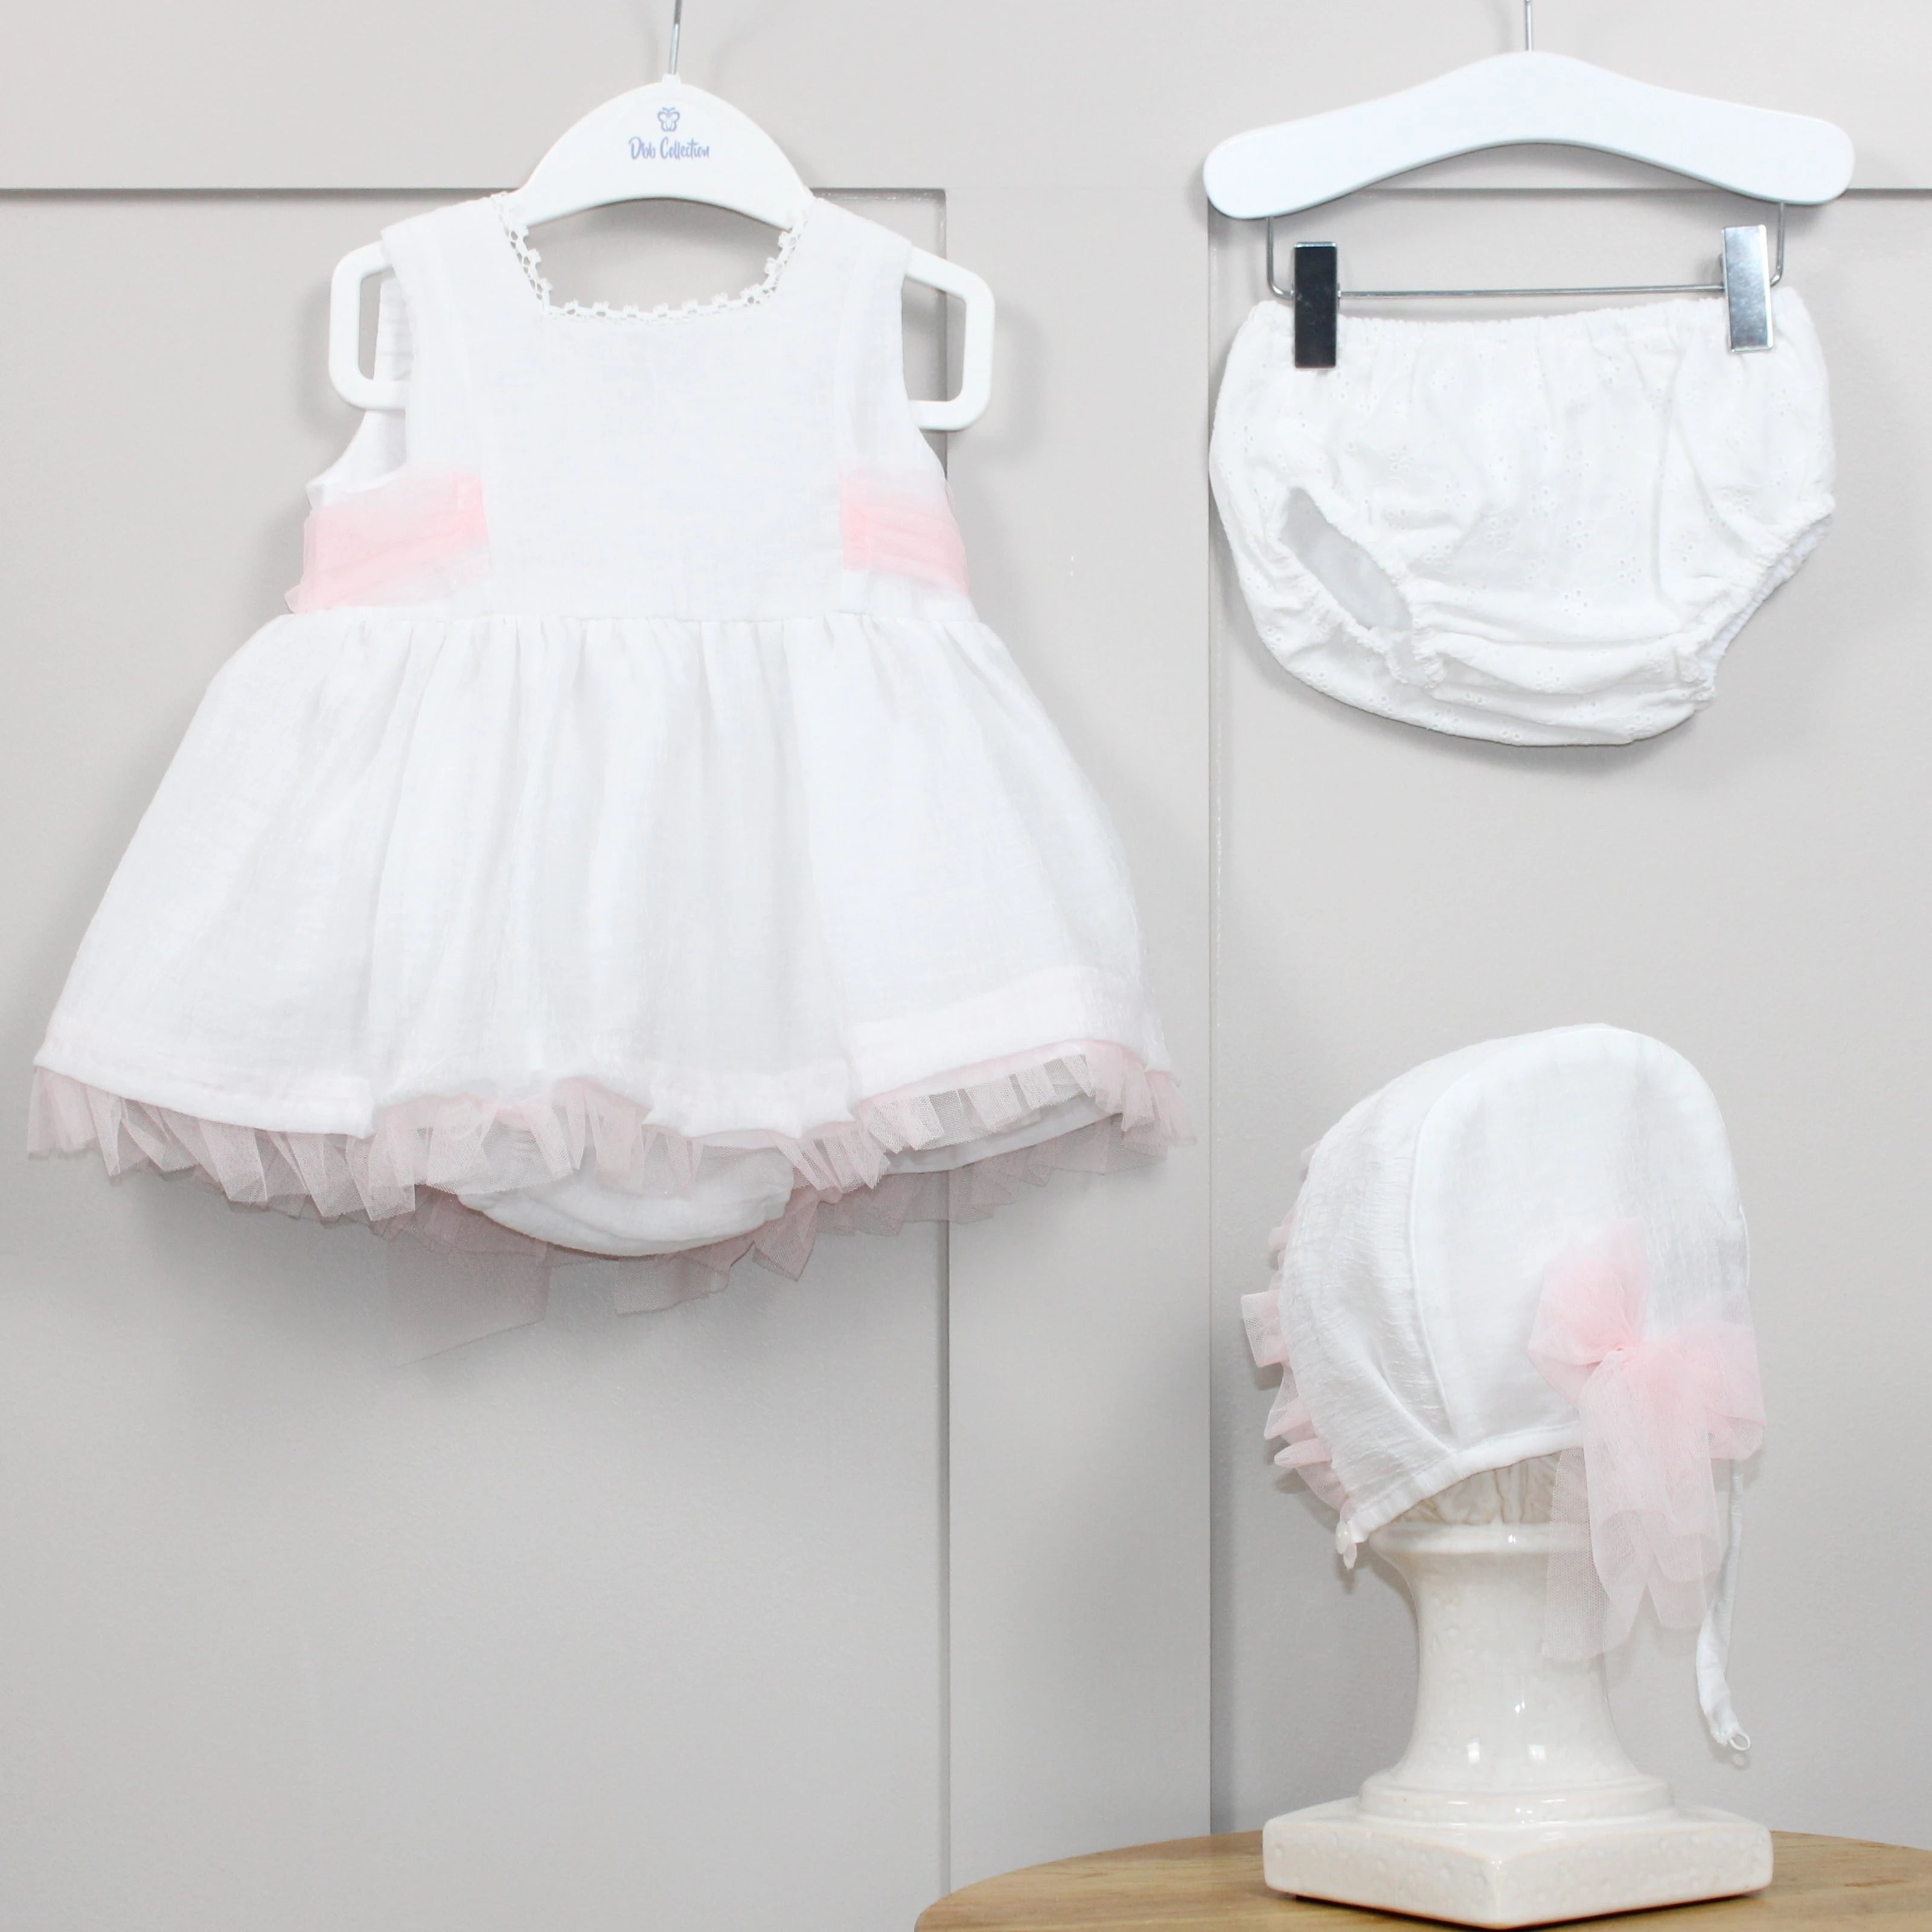 dbb collections white dress set with pink tulle sash